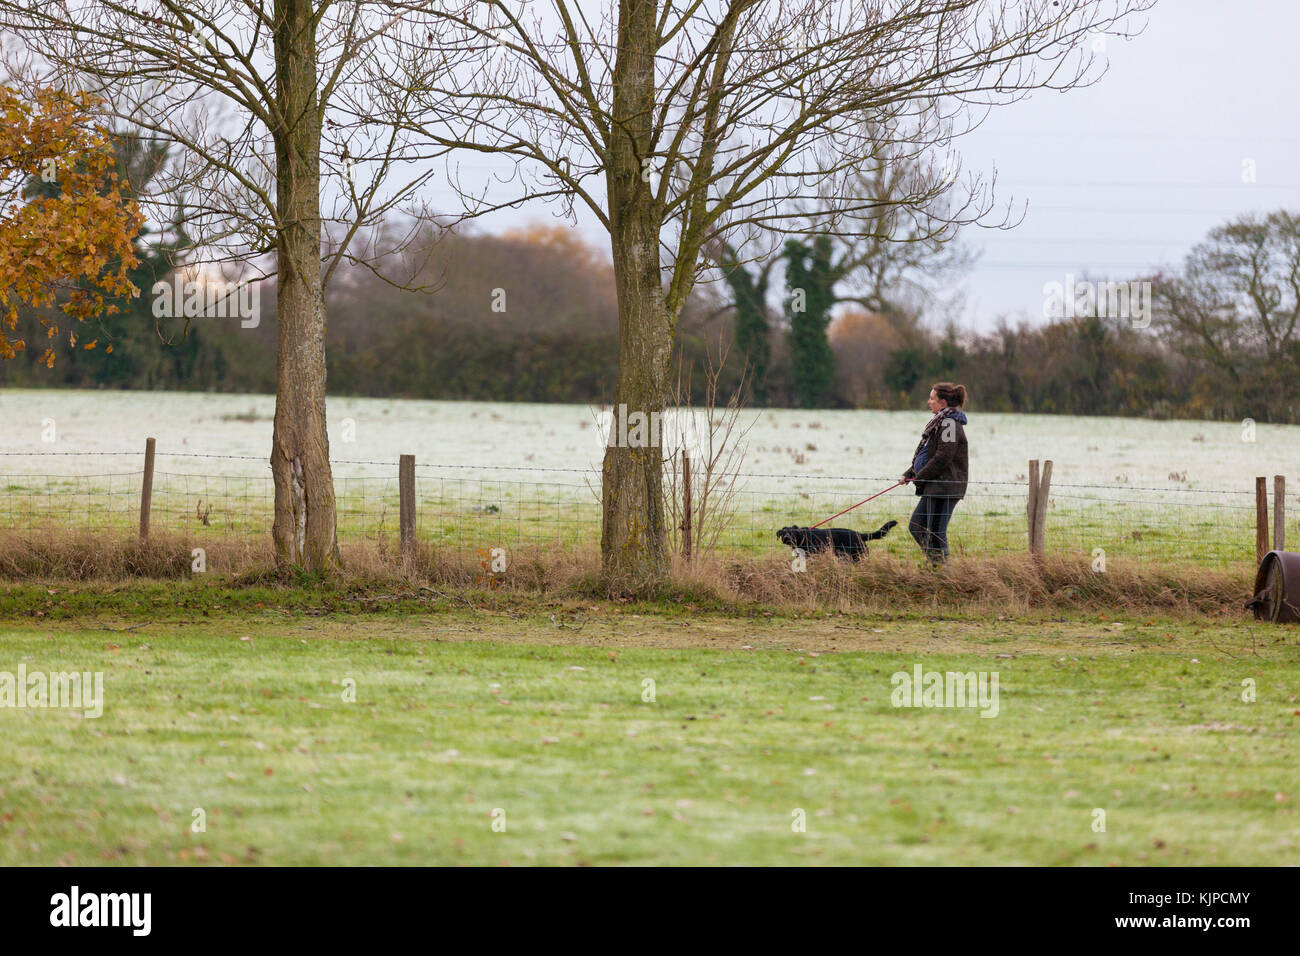 Ashford, Kent, UK. 25th November, 2017. Cold and frosty start to the day in rural Kent. The weather is expected to be sunny and bright but remain cold throughout the day with a maximum temperature of 5c. A women walks her dog on a tree lined field. Photo Credit: Paul Lawrenson /Alamy Live News Stock Photo